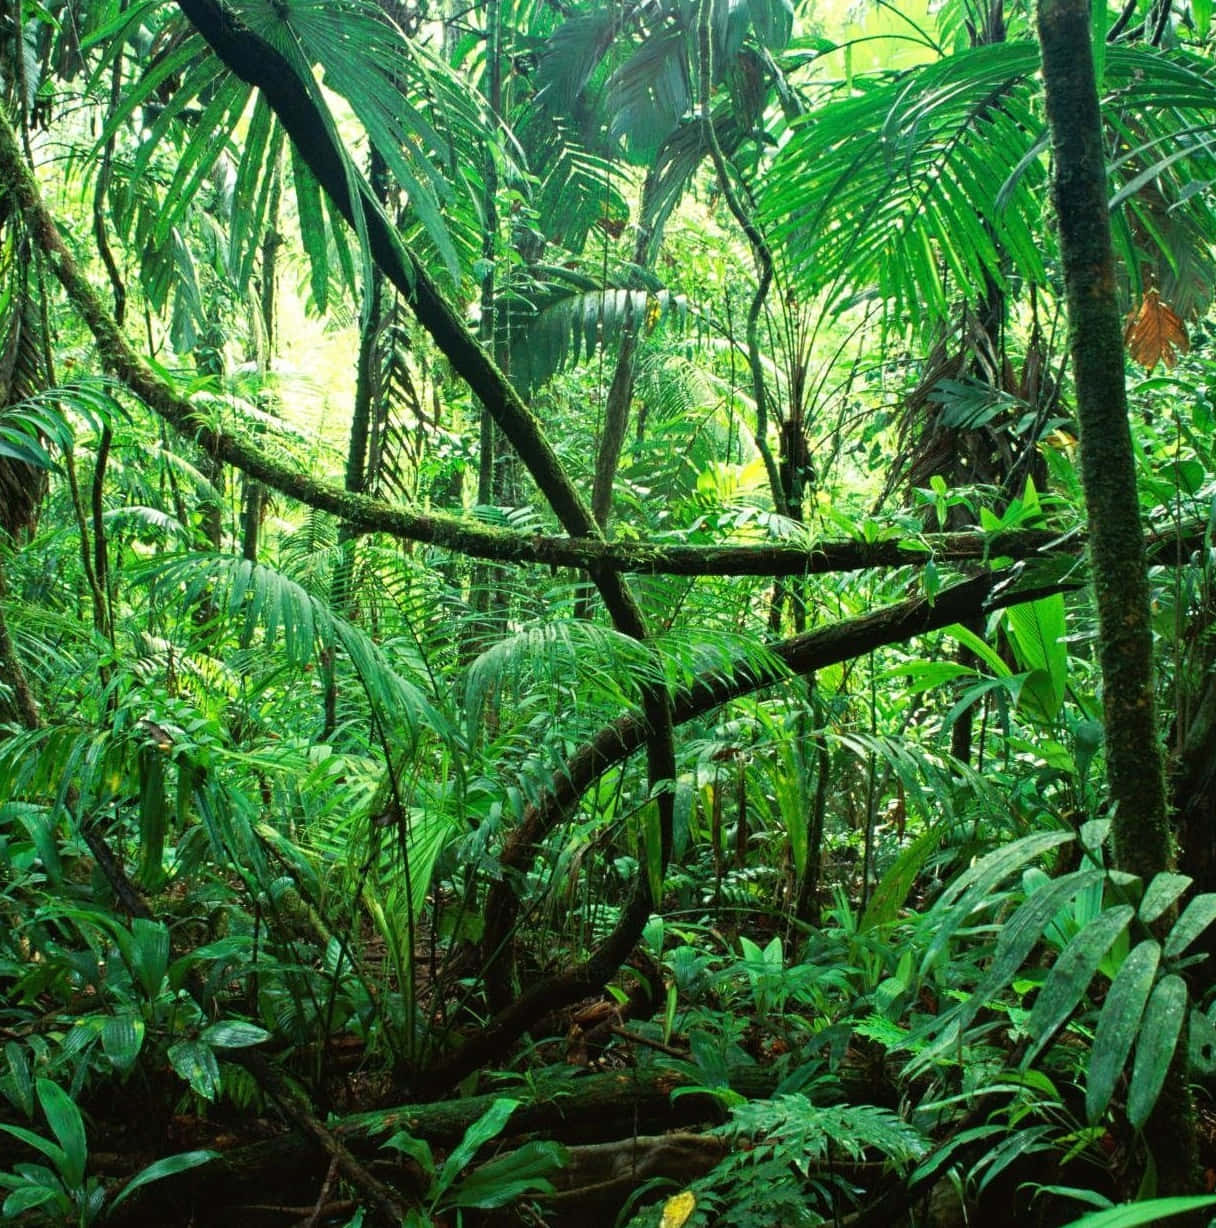 A Tropical Rainforest With Many Trees And Plants